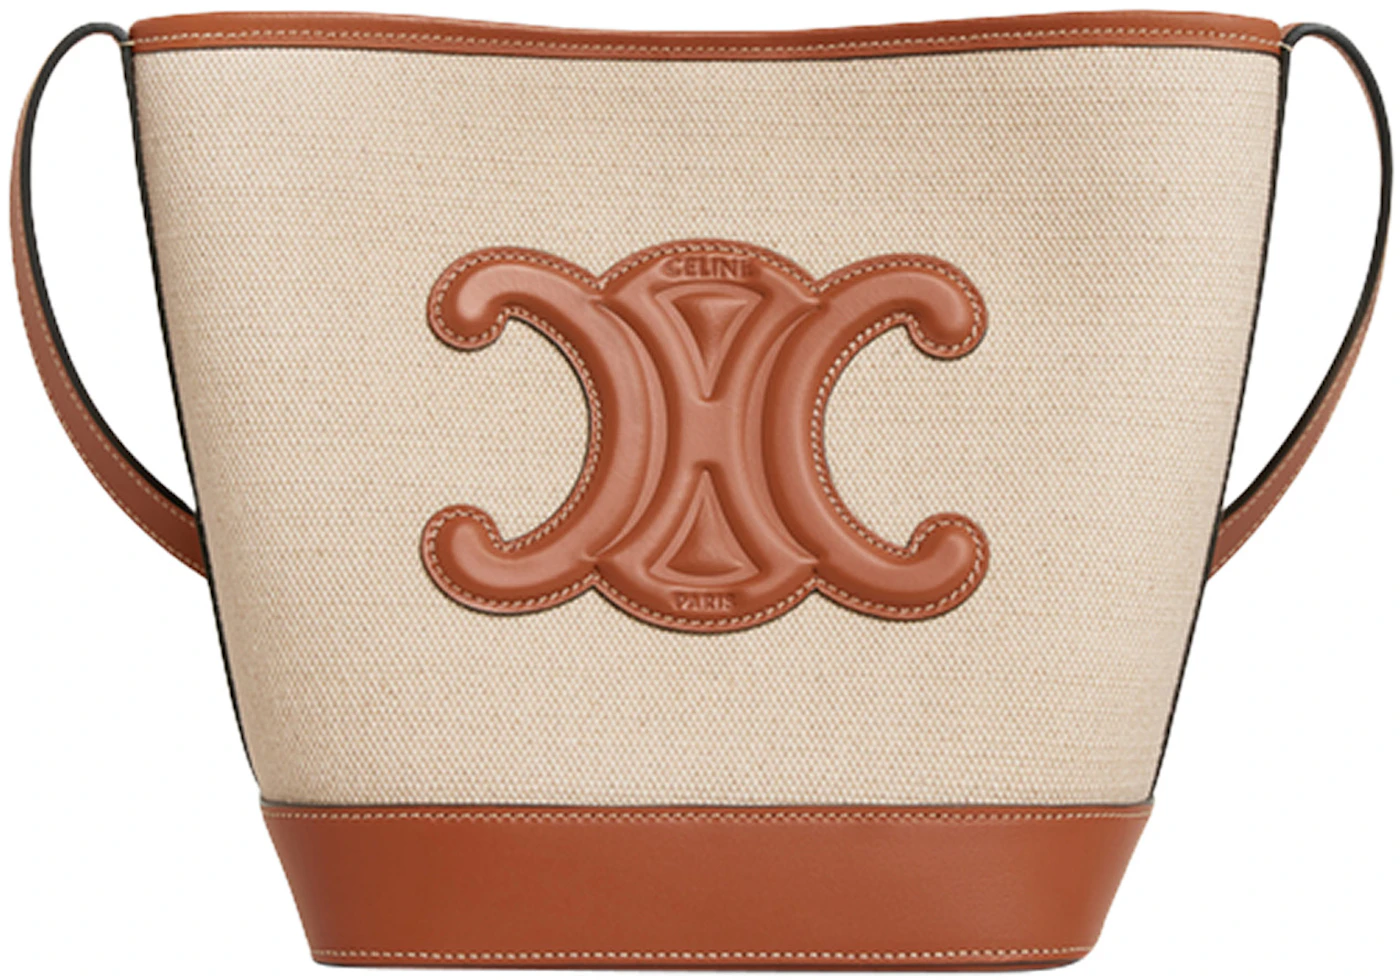 Celine Bucket Bag Small Triomphe Embroidery Tan in Smooth Calfskin